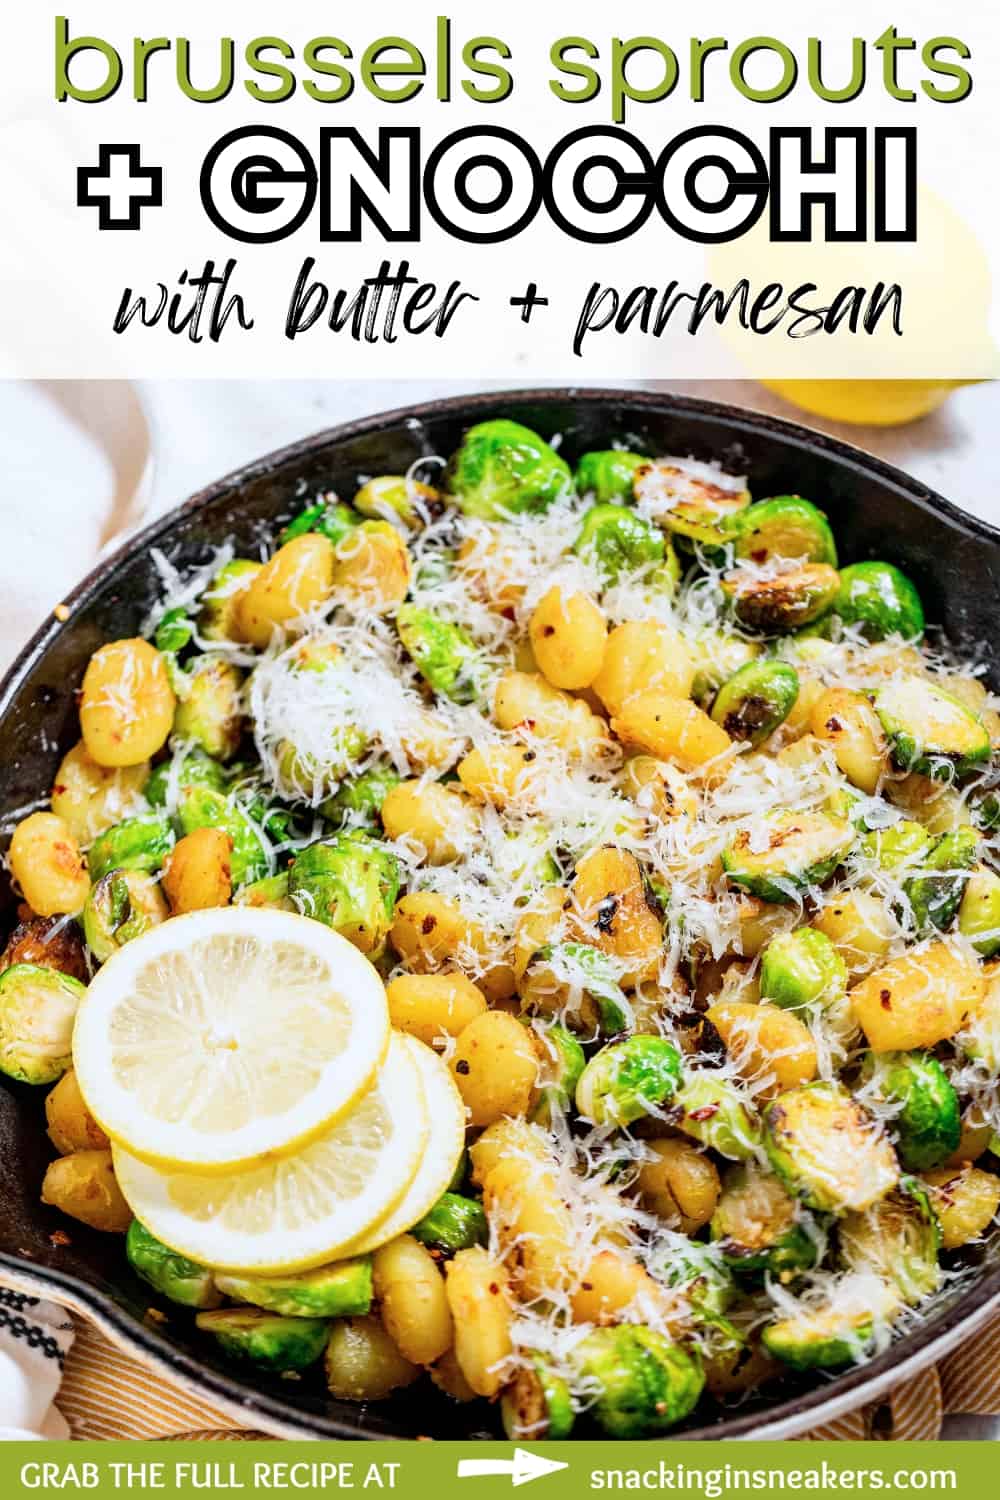 Gnocchi and brussels sprouts in a skillet topped with parmesan, with a text overlay with the name of the recipe.